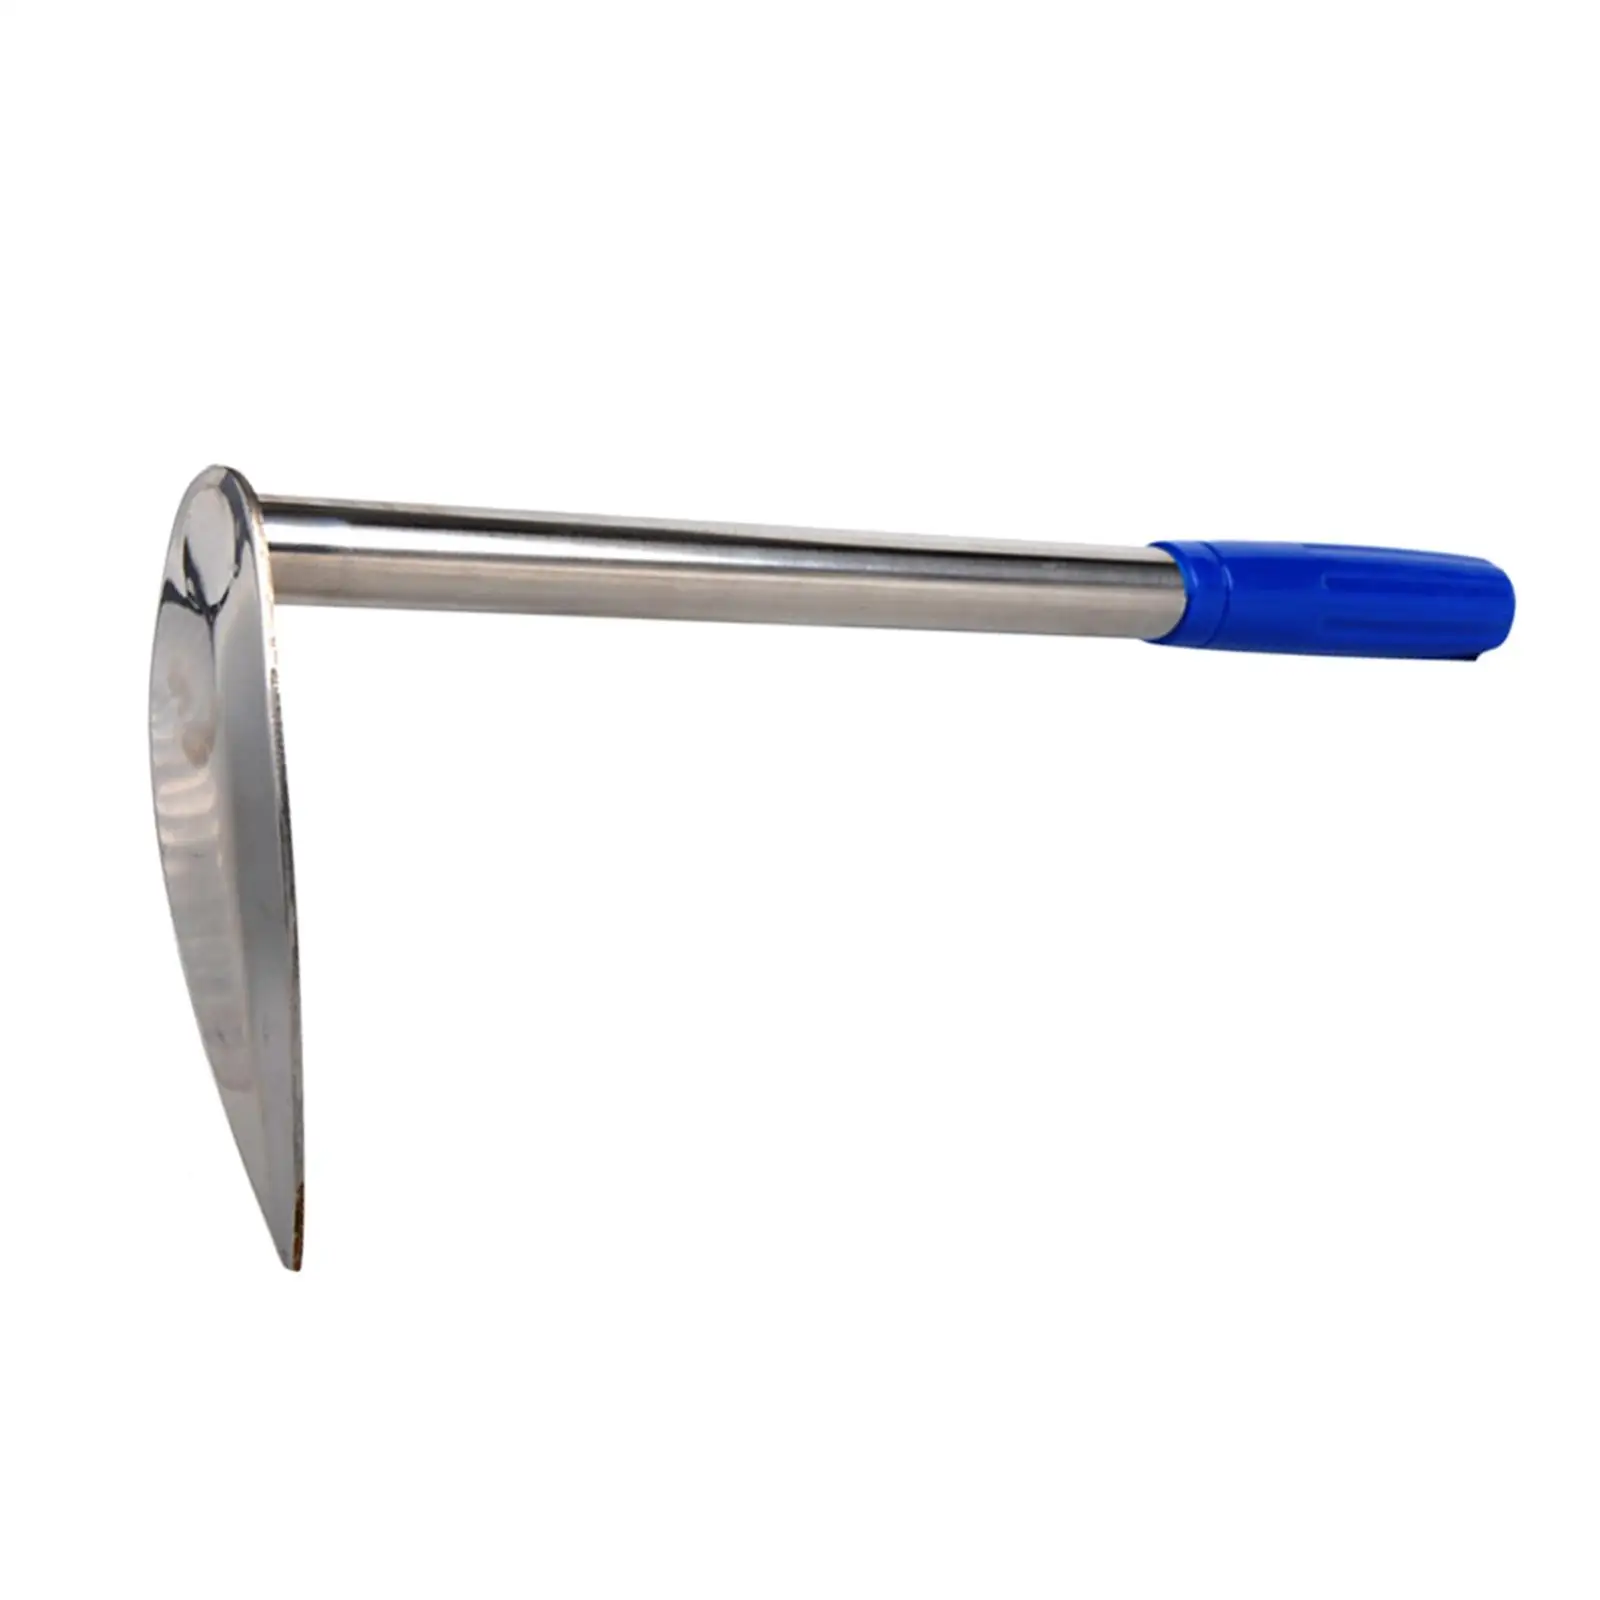 Stainless Steel Gardening Hoe Weeding Removal Tool with Handle Gardening